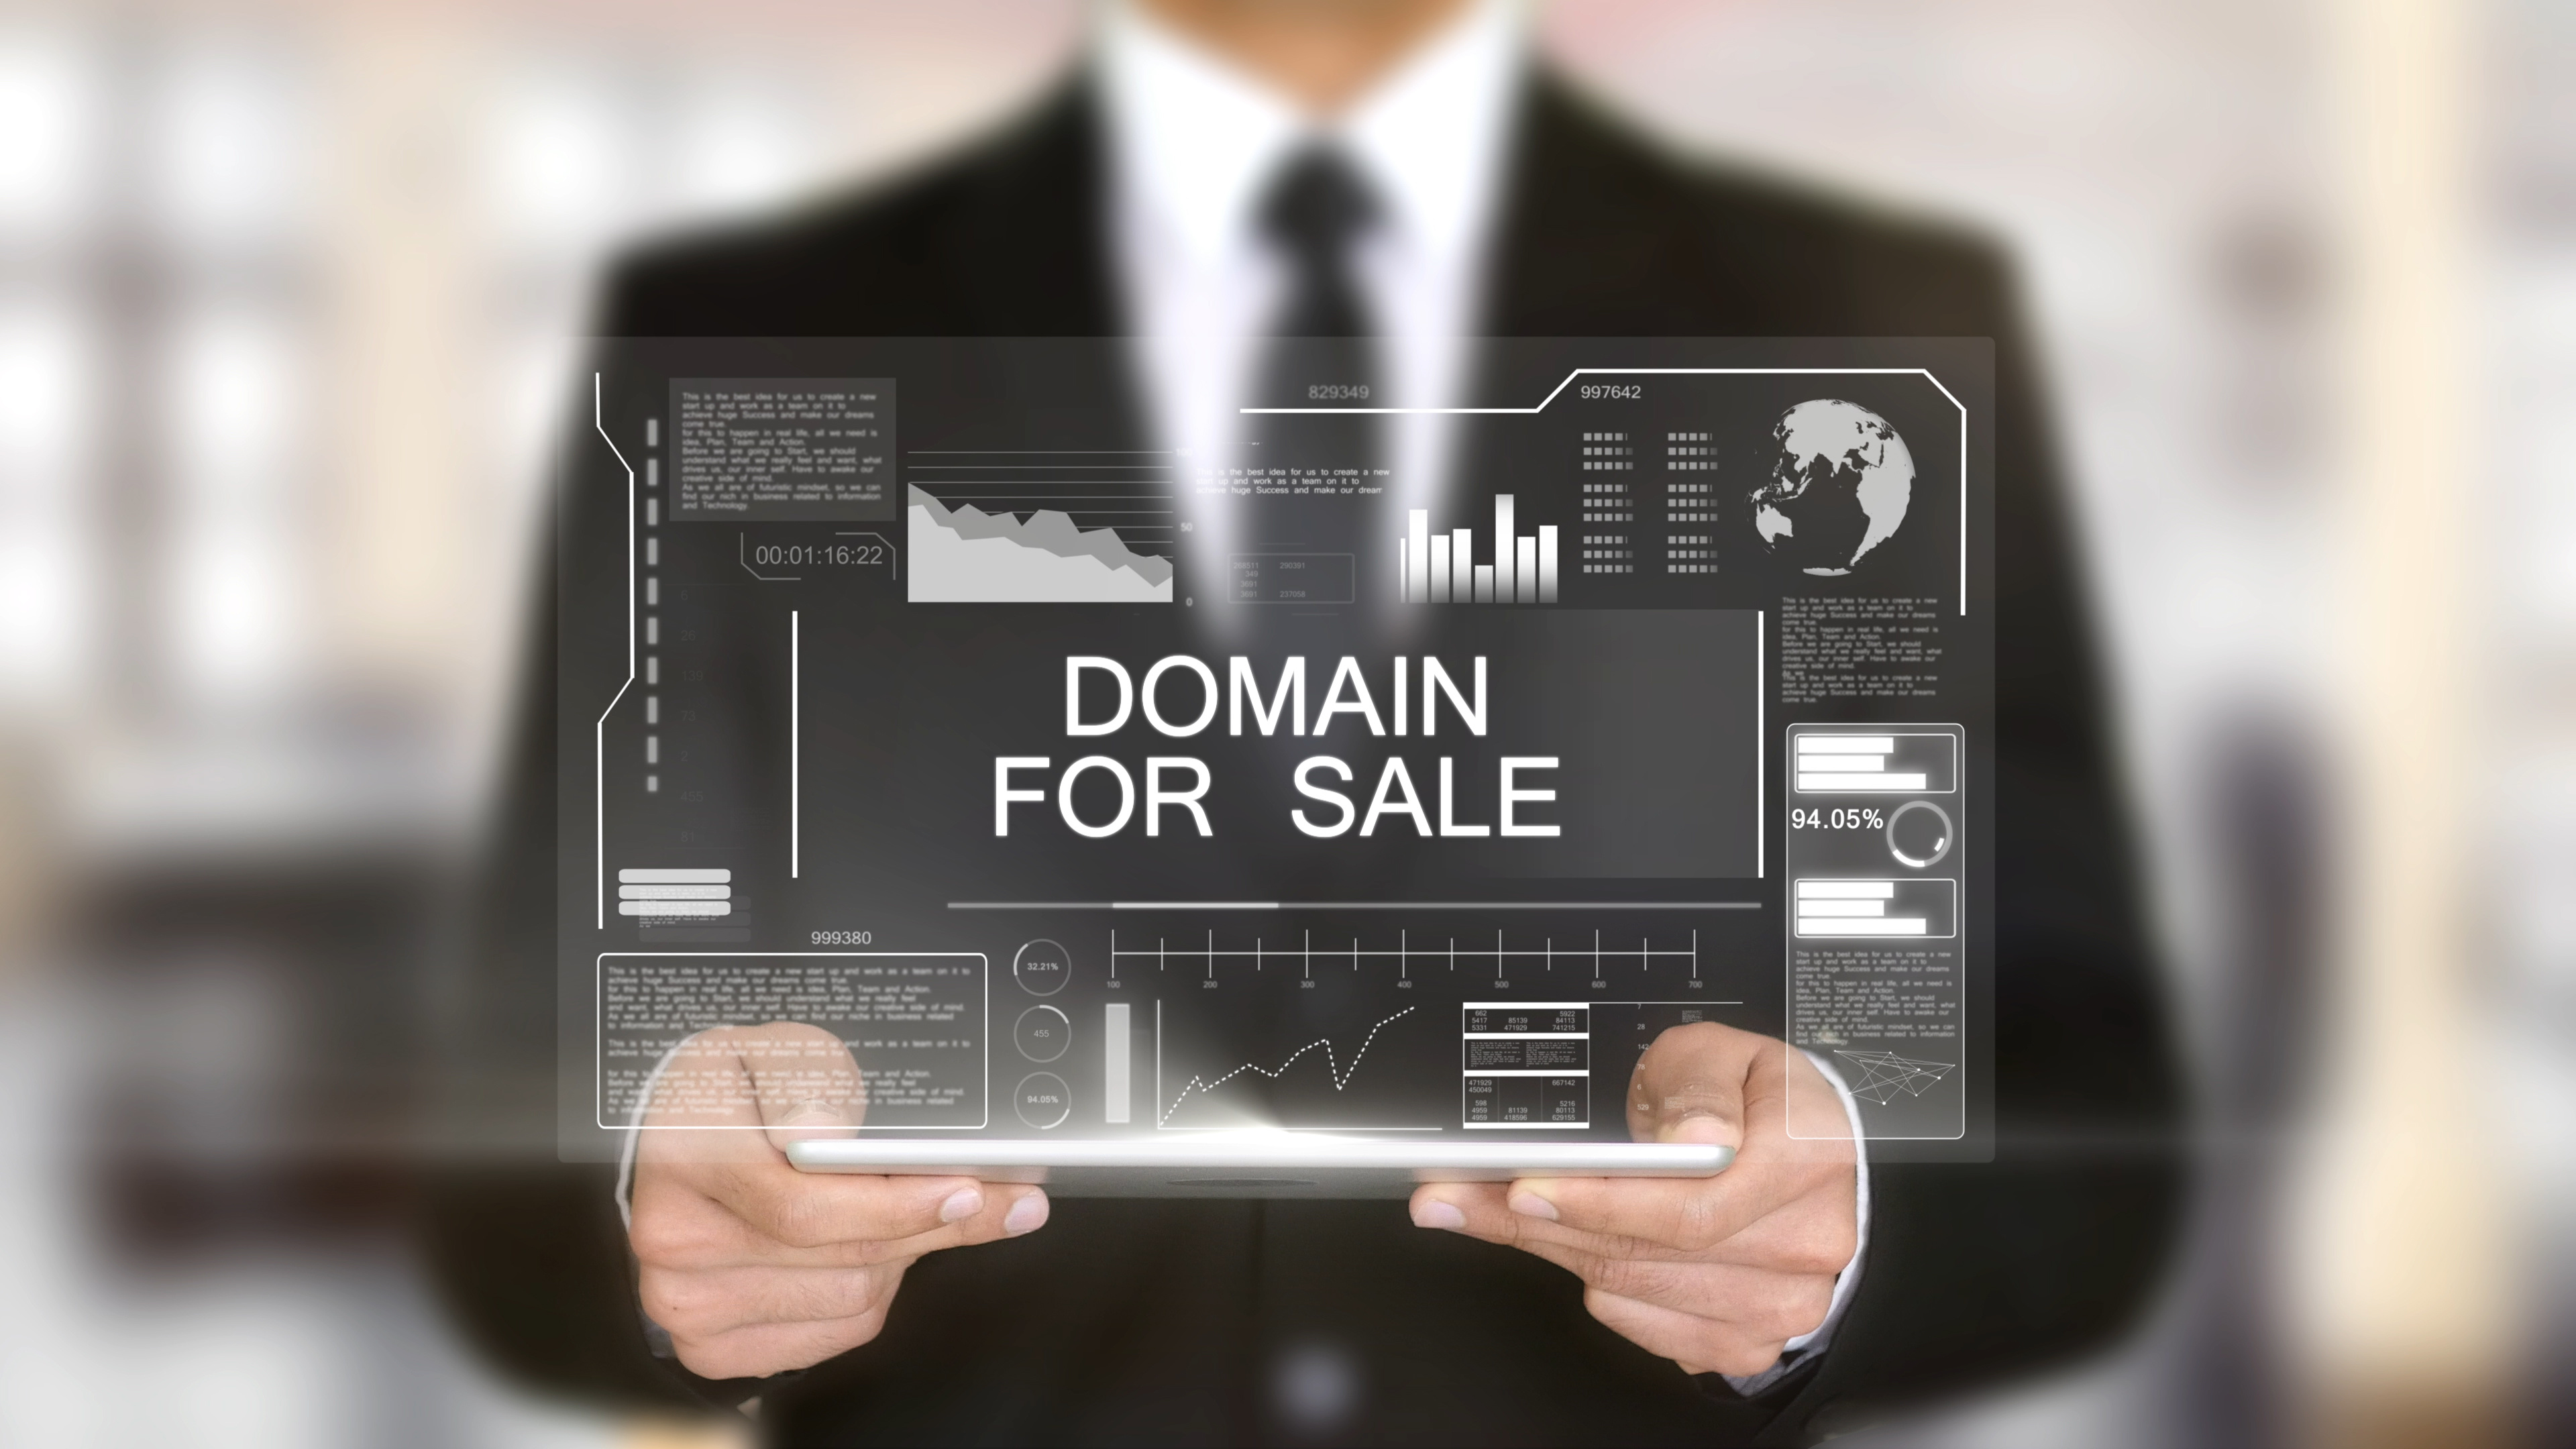 How To Make A Cheap Domain Purchase To Build Online Business Presence